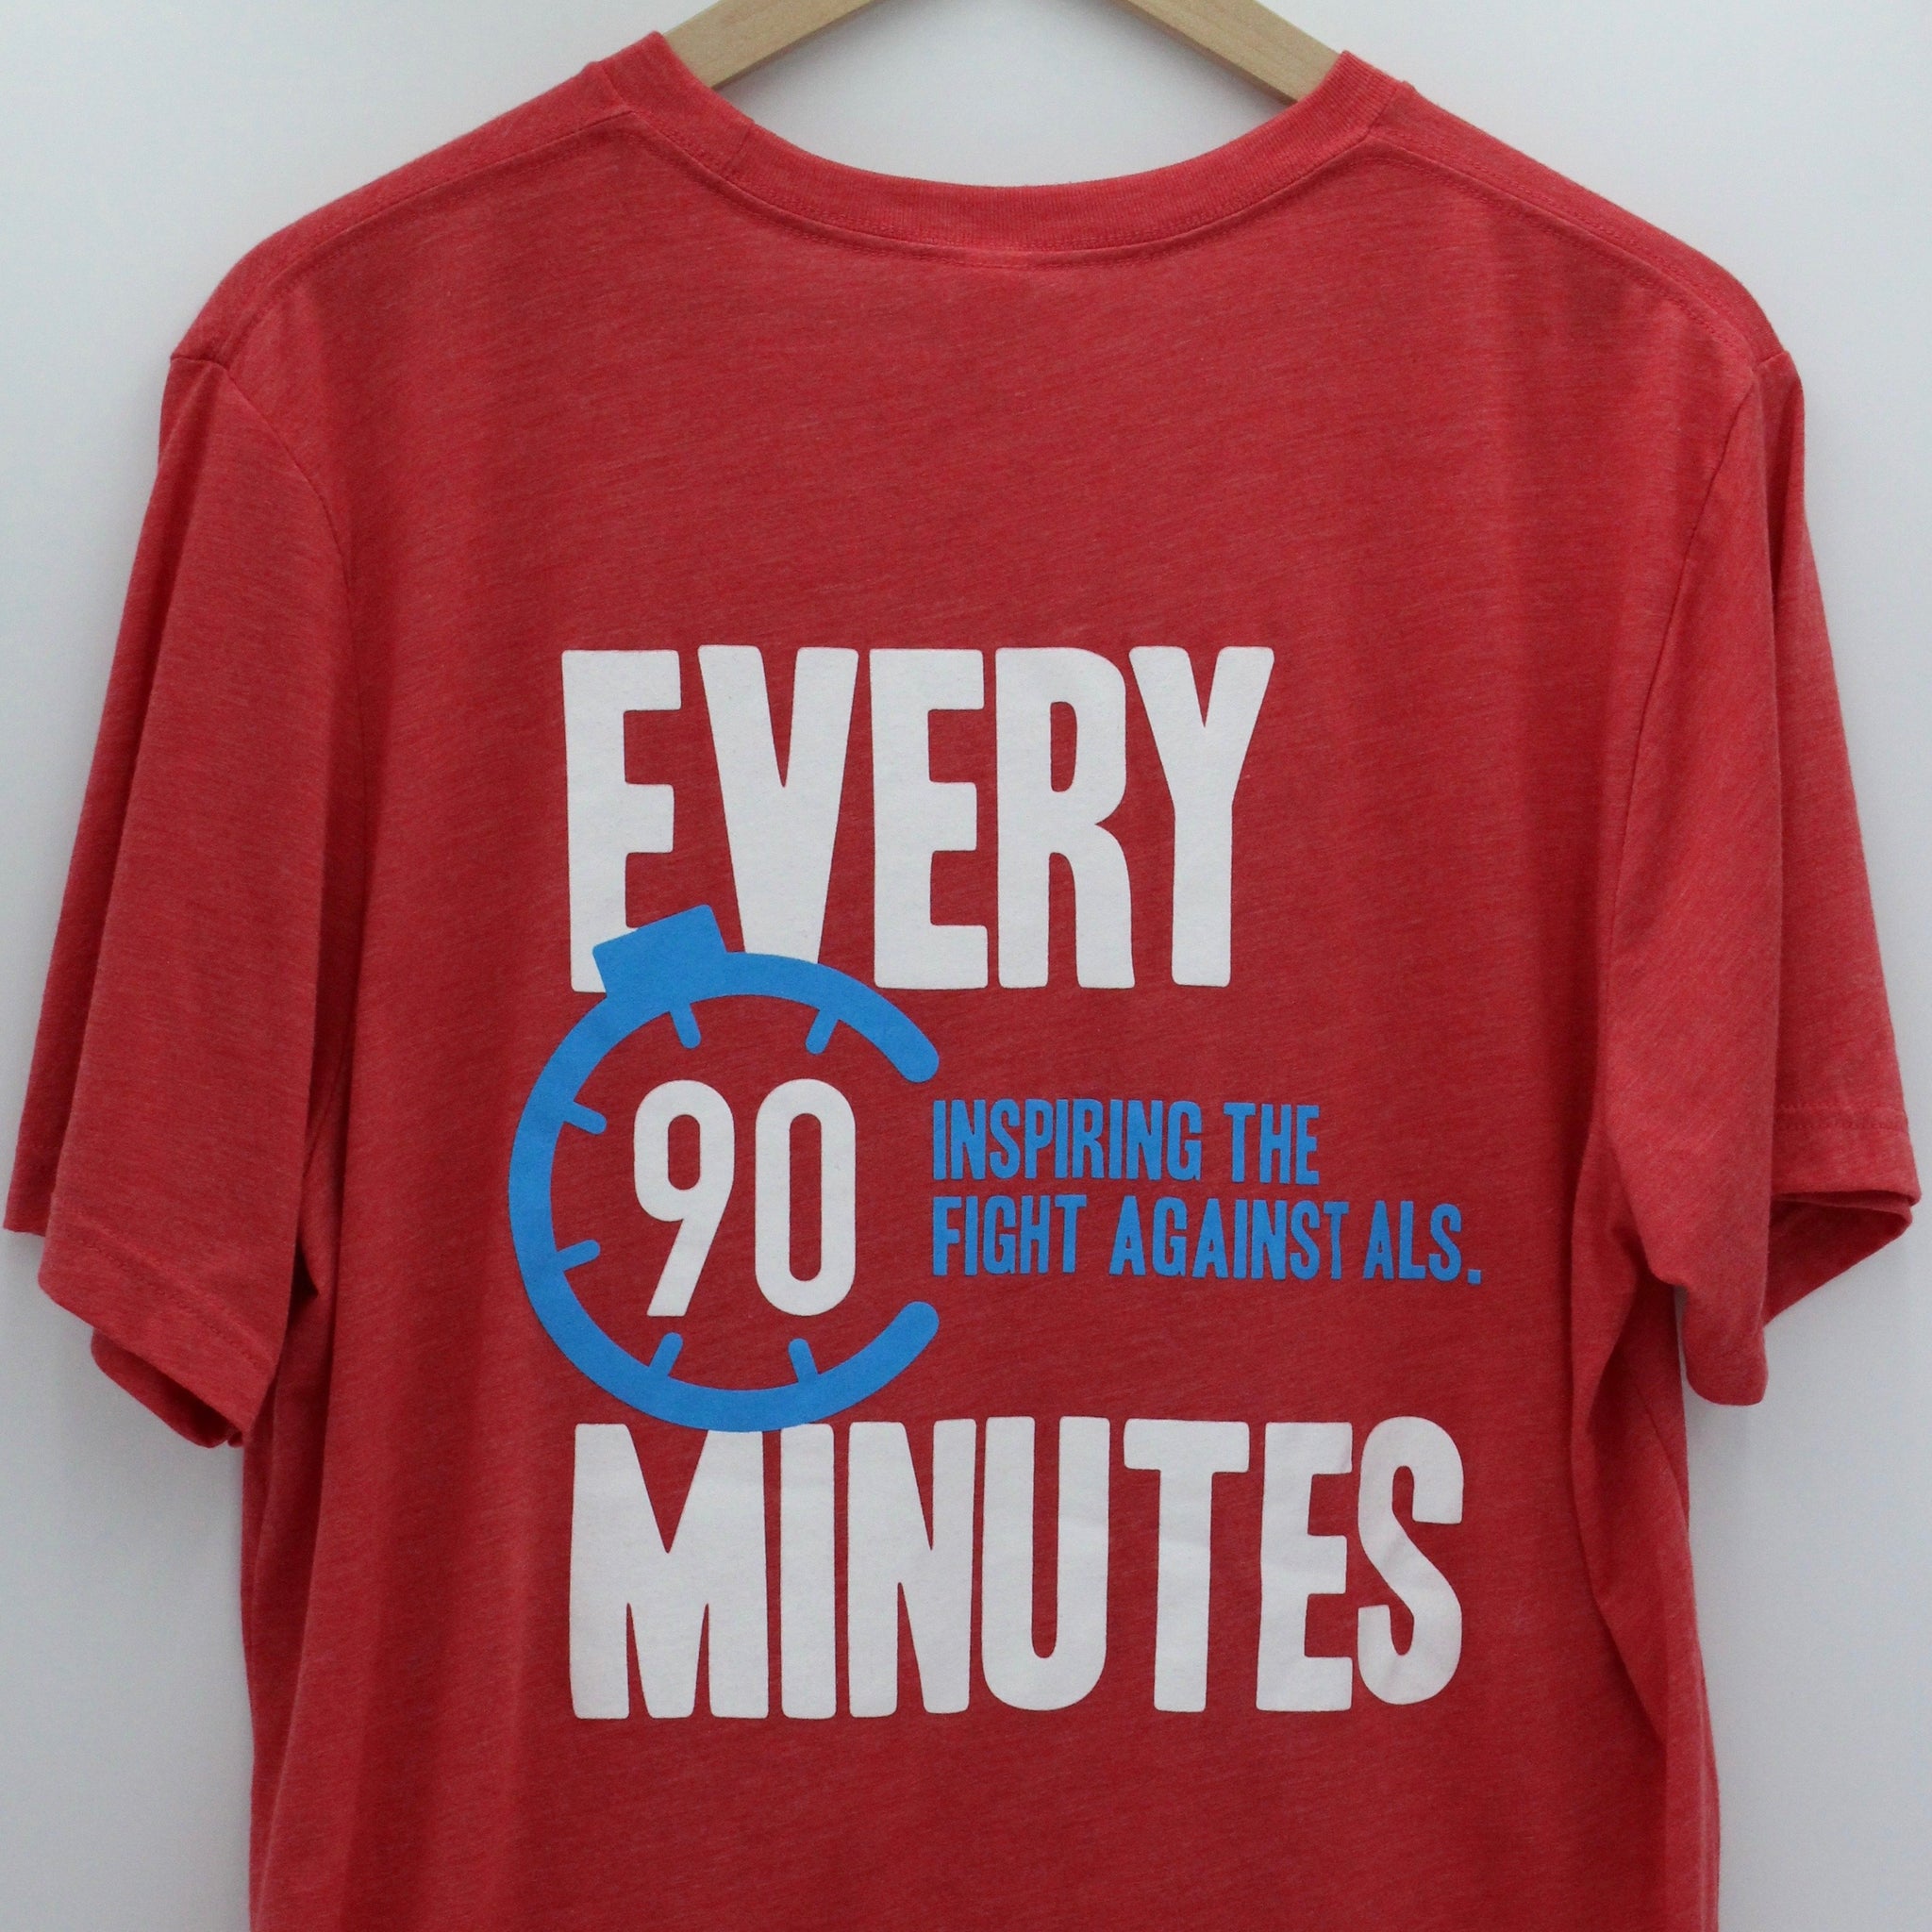 Every 90 Minutes ~ ALS Tee